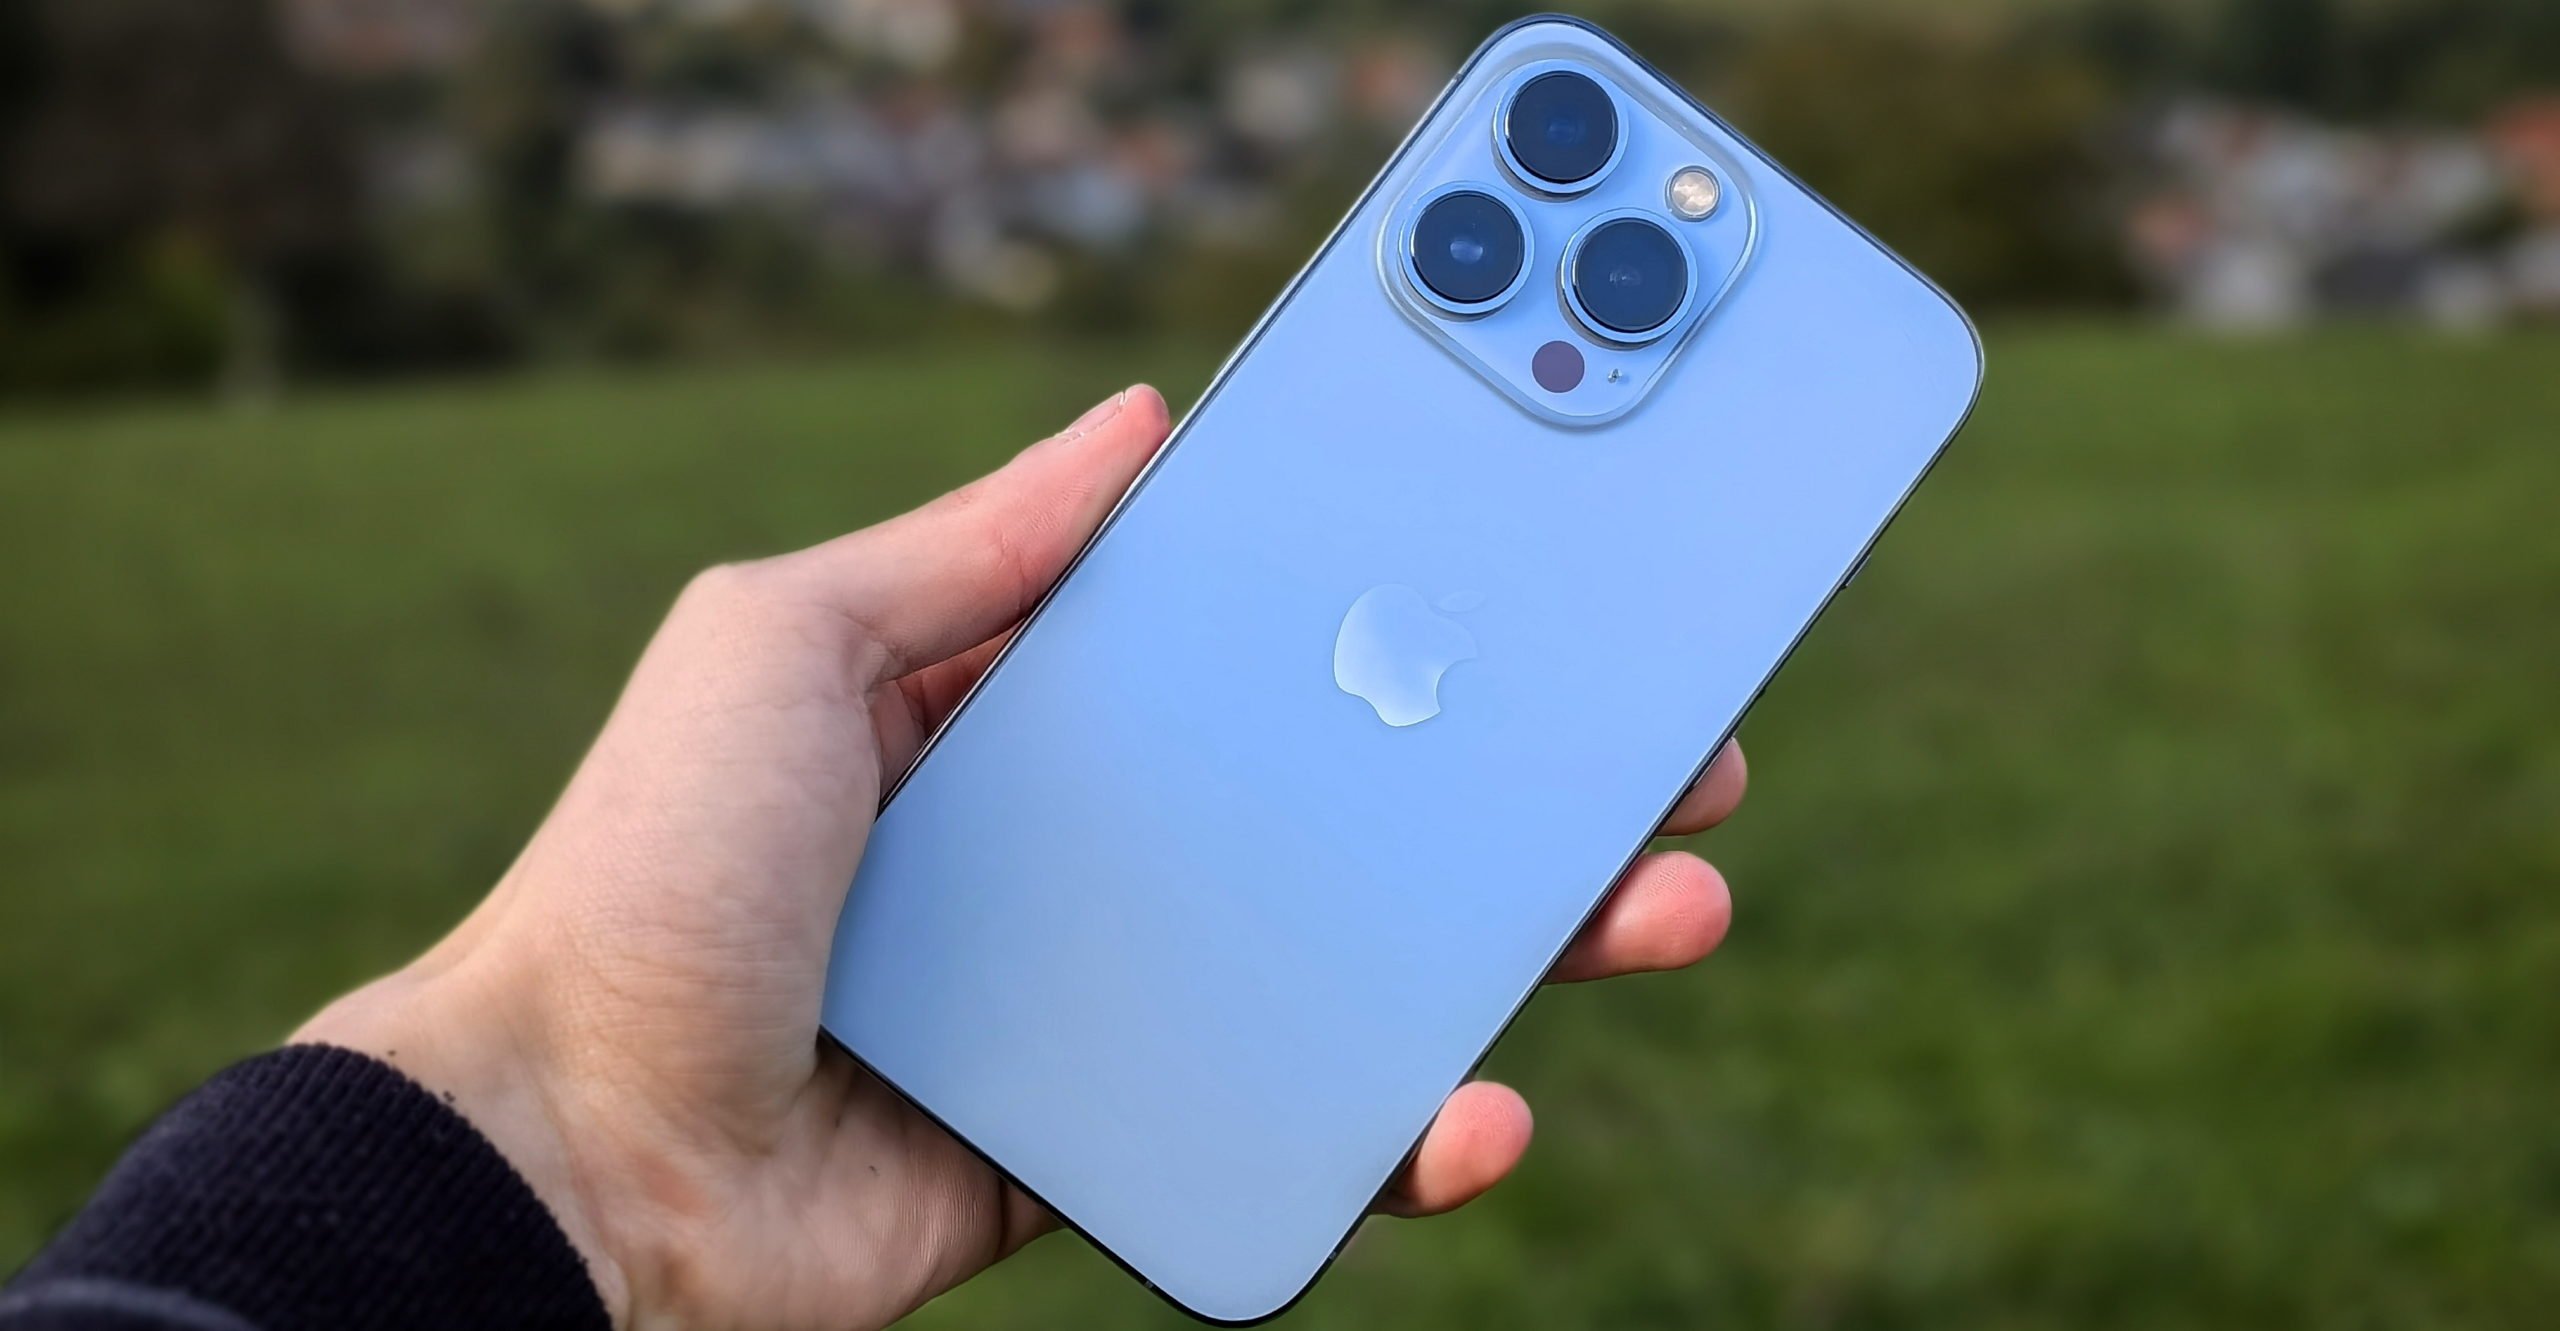 Apple iPhone 13 Pro review -  tests